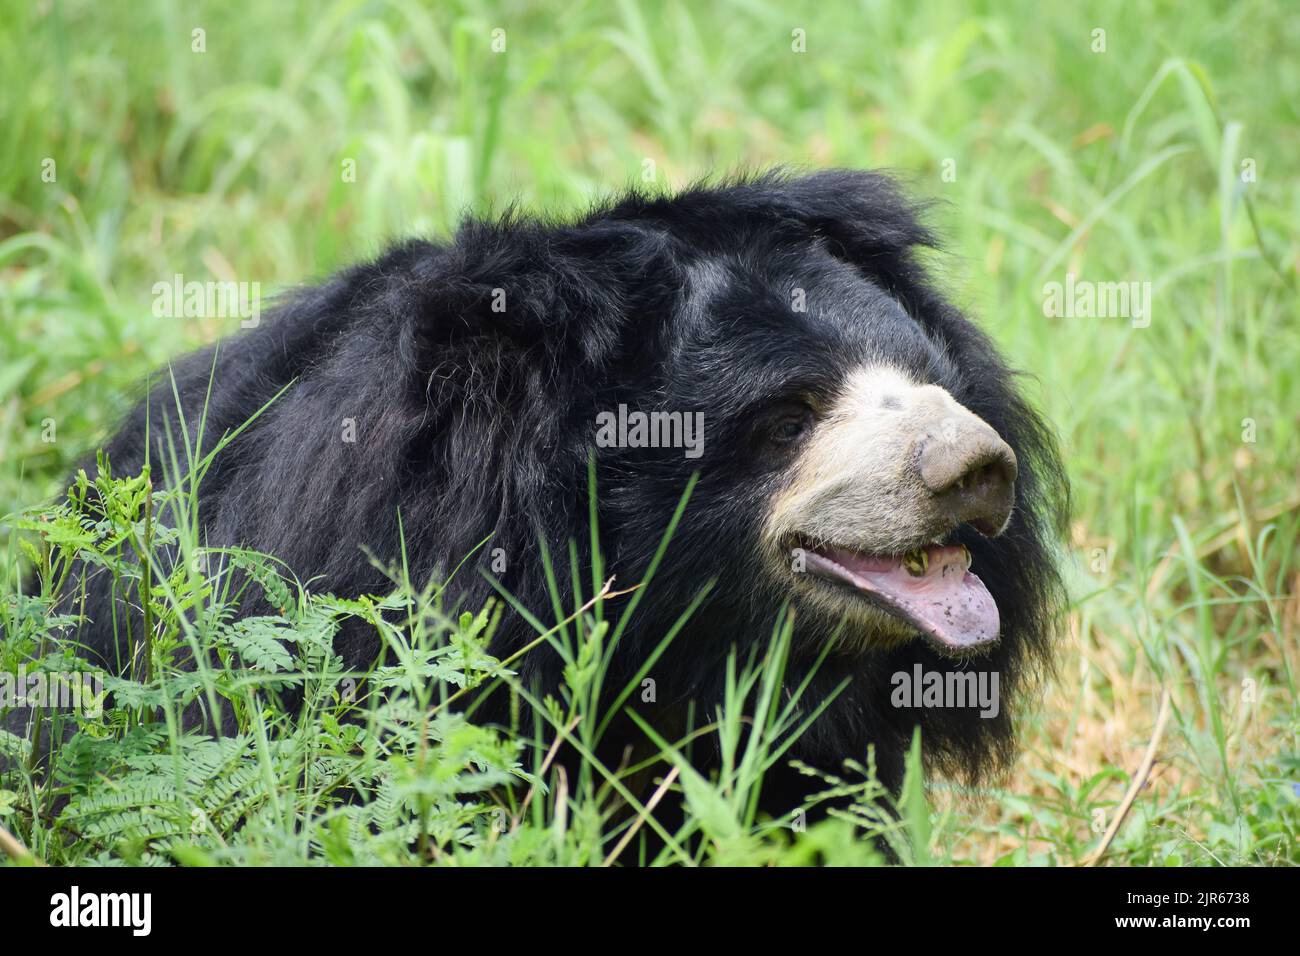 Indian bear is taking rest on grass field at wildlife sanctuary. Stock Photo